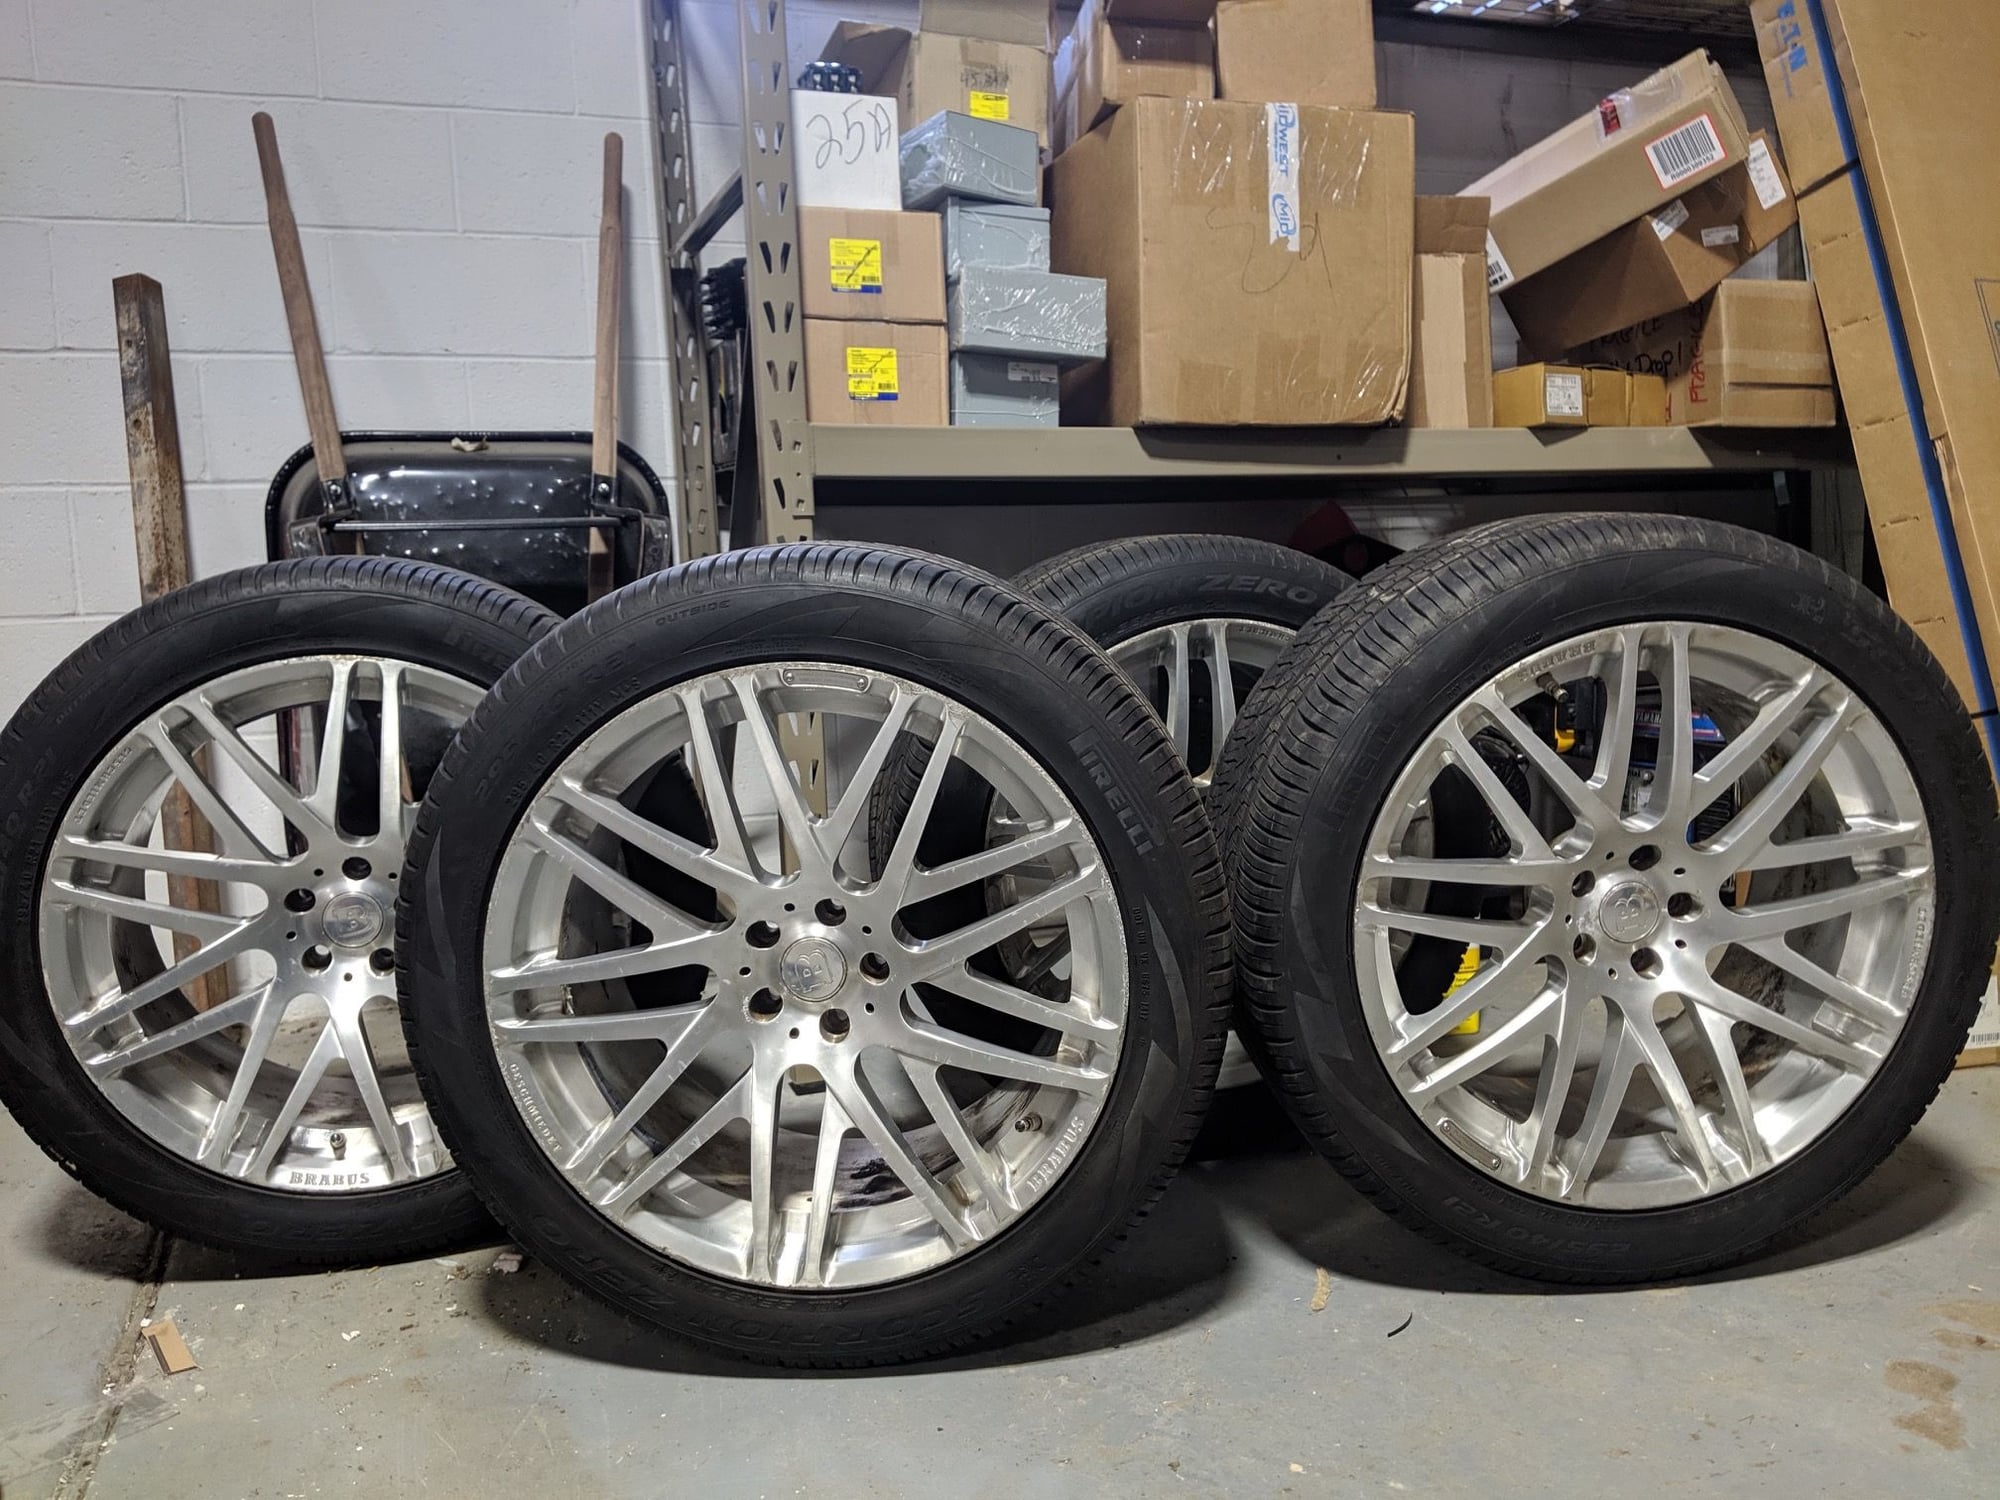 Wheels and Tires/Axles - Genuine Brabus Wheels - Used - 2014 to 2016 Mercedes-Benz GL63 AMG - 2017 to 2021 Mercedes-Benz GLS63 AMG - Milwaukee, WI 53202, United States